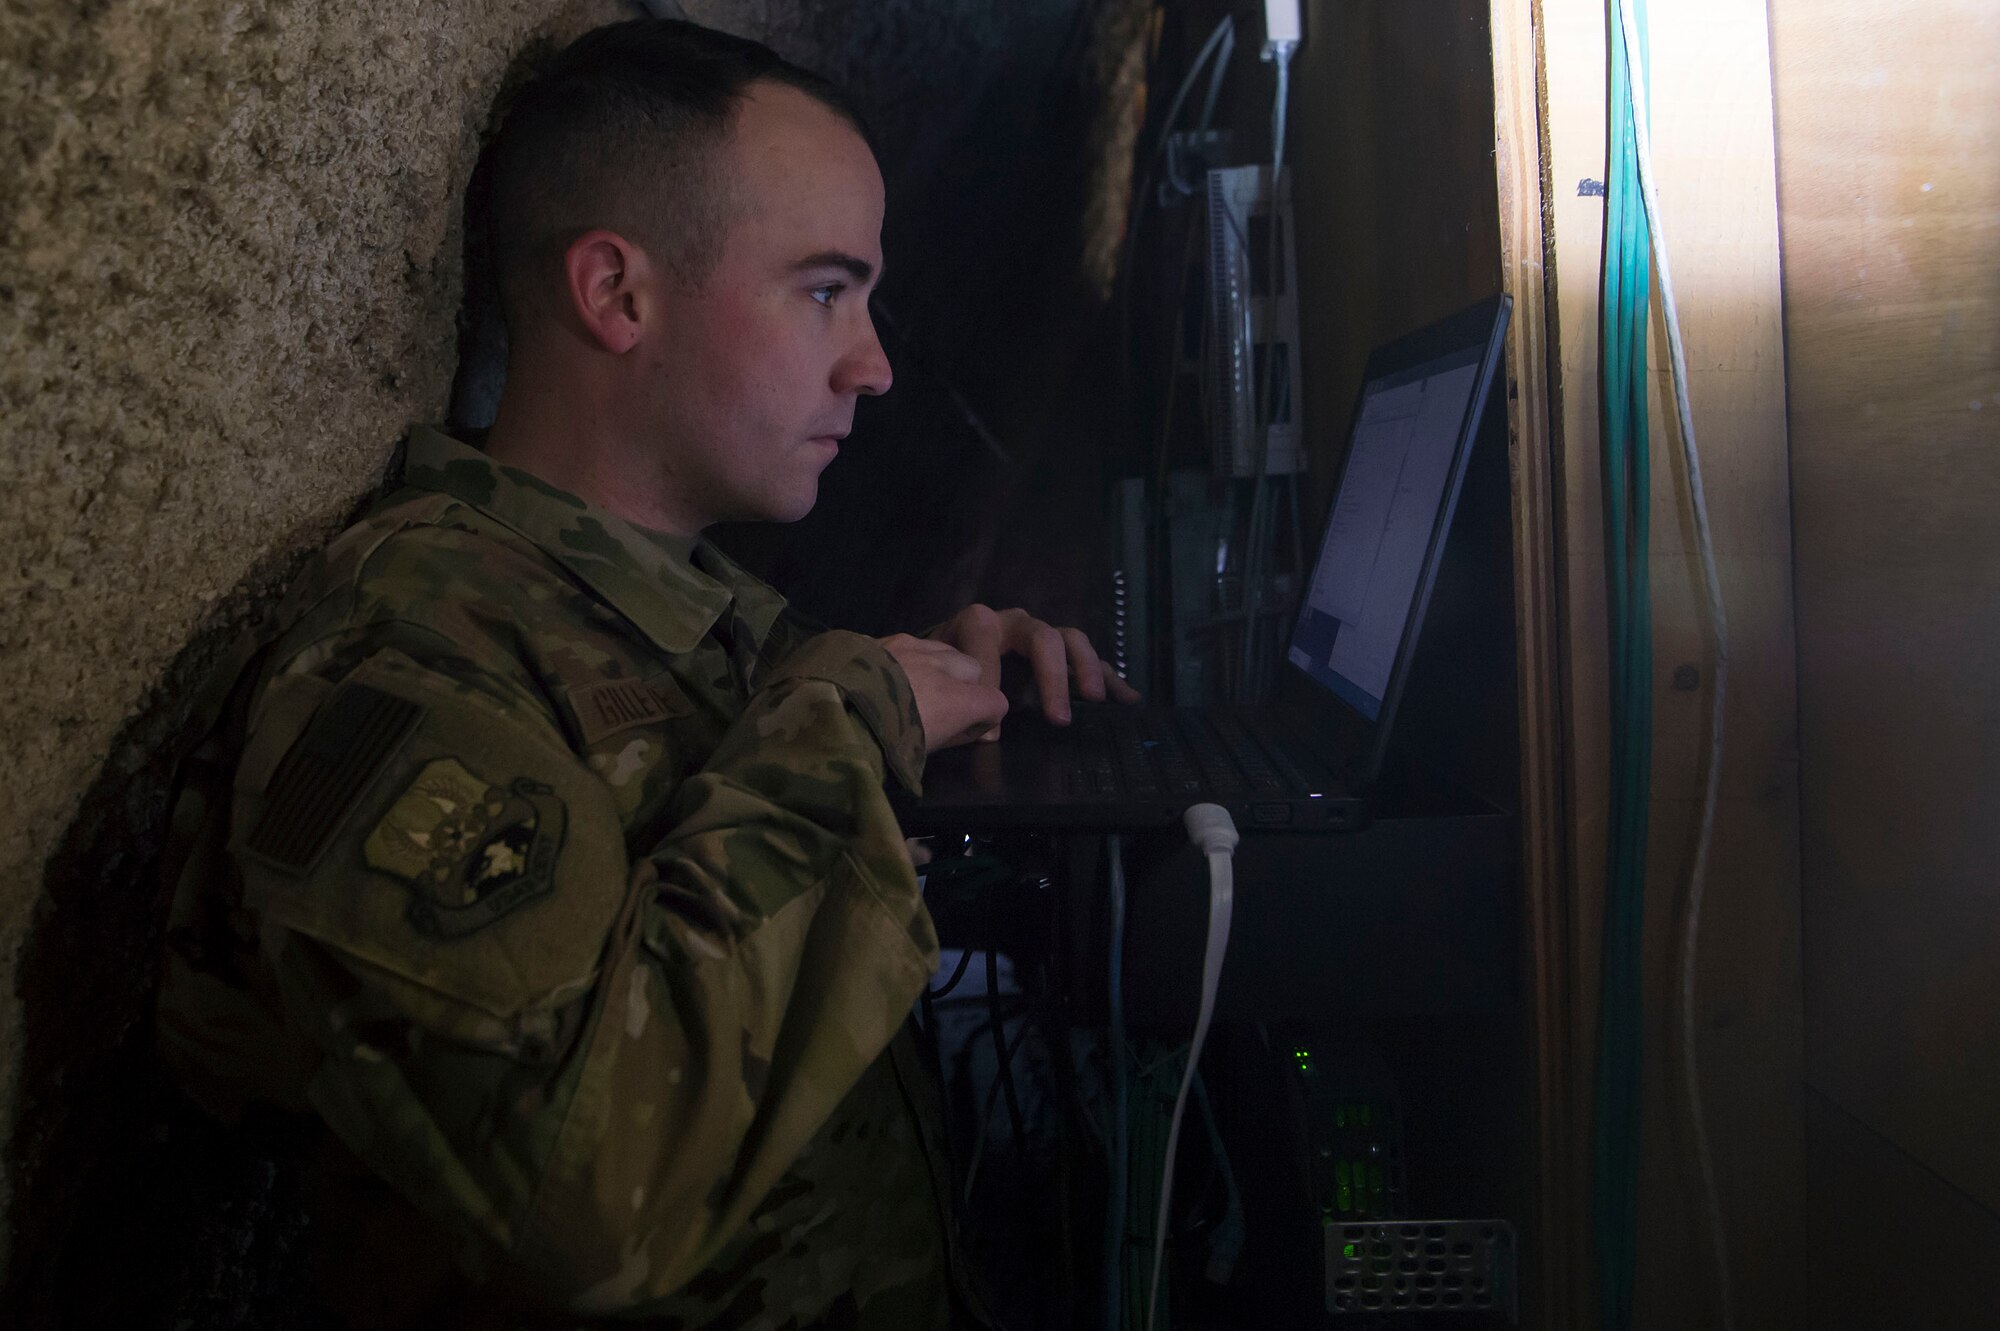 Staff Sgt. Jason Gillette, 379th Expeditionary Communications Squadron (ECS) cyber transport technician, checks communications equipment for a coalition partner facility Feb. 8, 2019, at Al Udeid Air Base, Qatar. Gillette is part of a “beddown” team that enables power projection by establishing communications capabilities such as networks, Voice over Internet Protocol telephones, and radios from the ground up (U.S. Air Force photo by Tech. Sgt. Christopher Hubenthal)